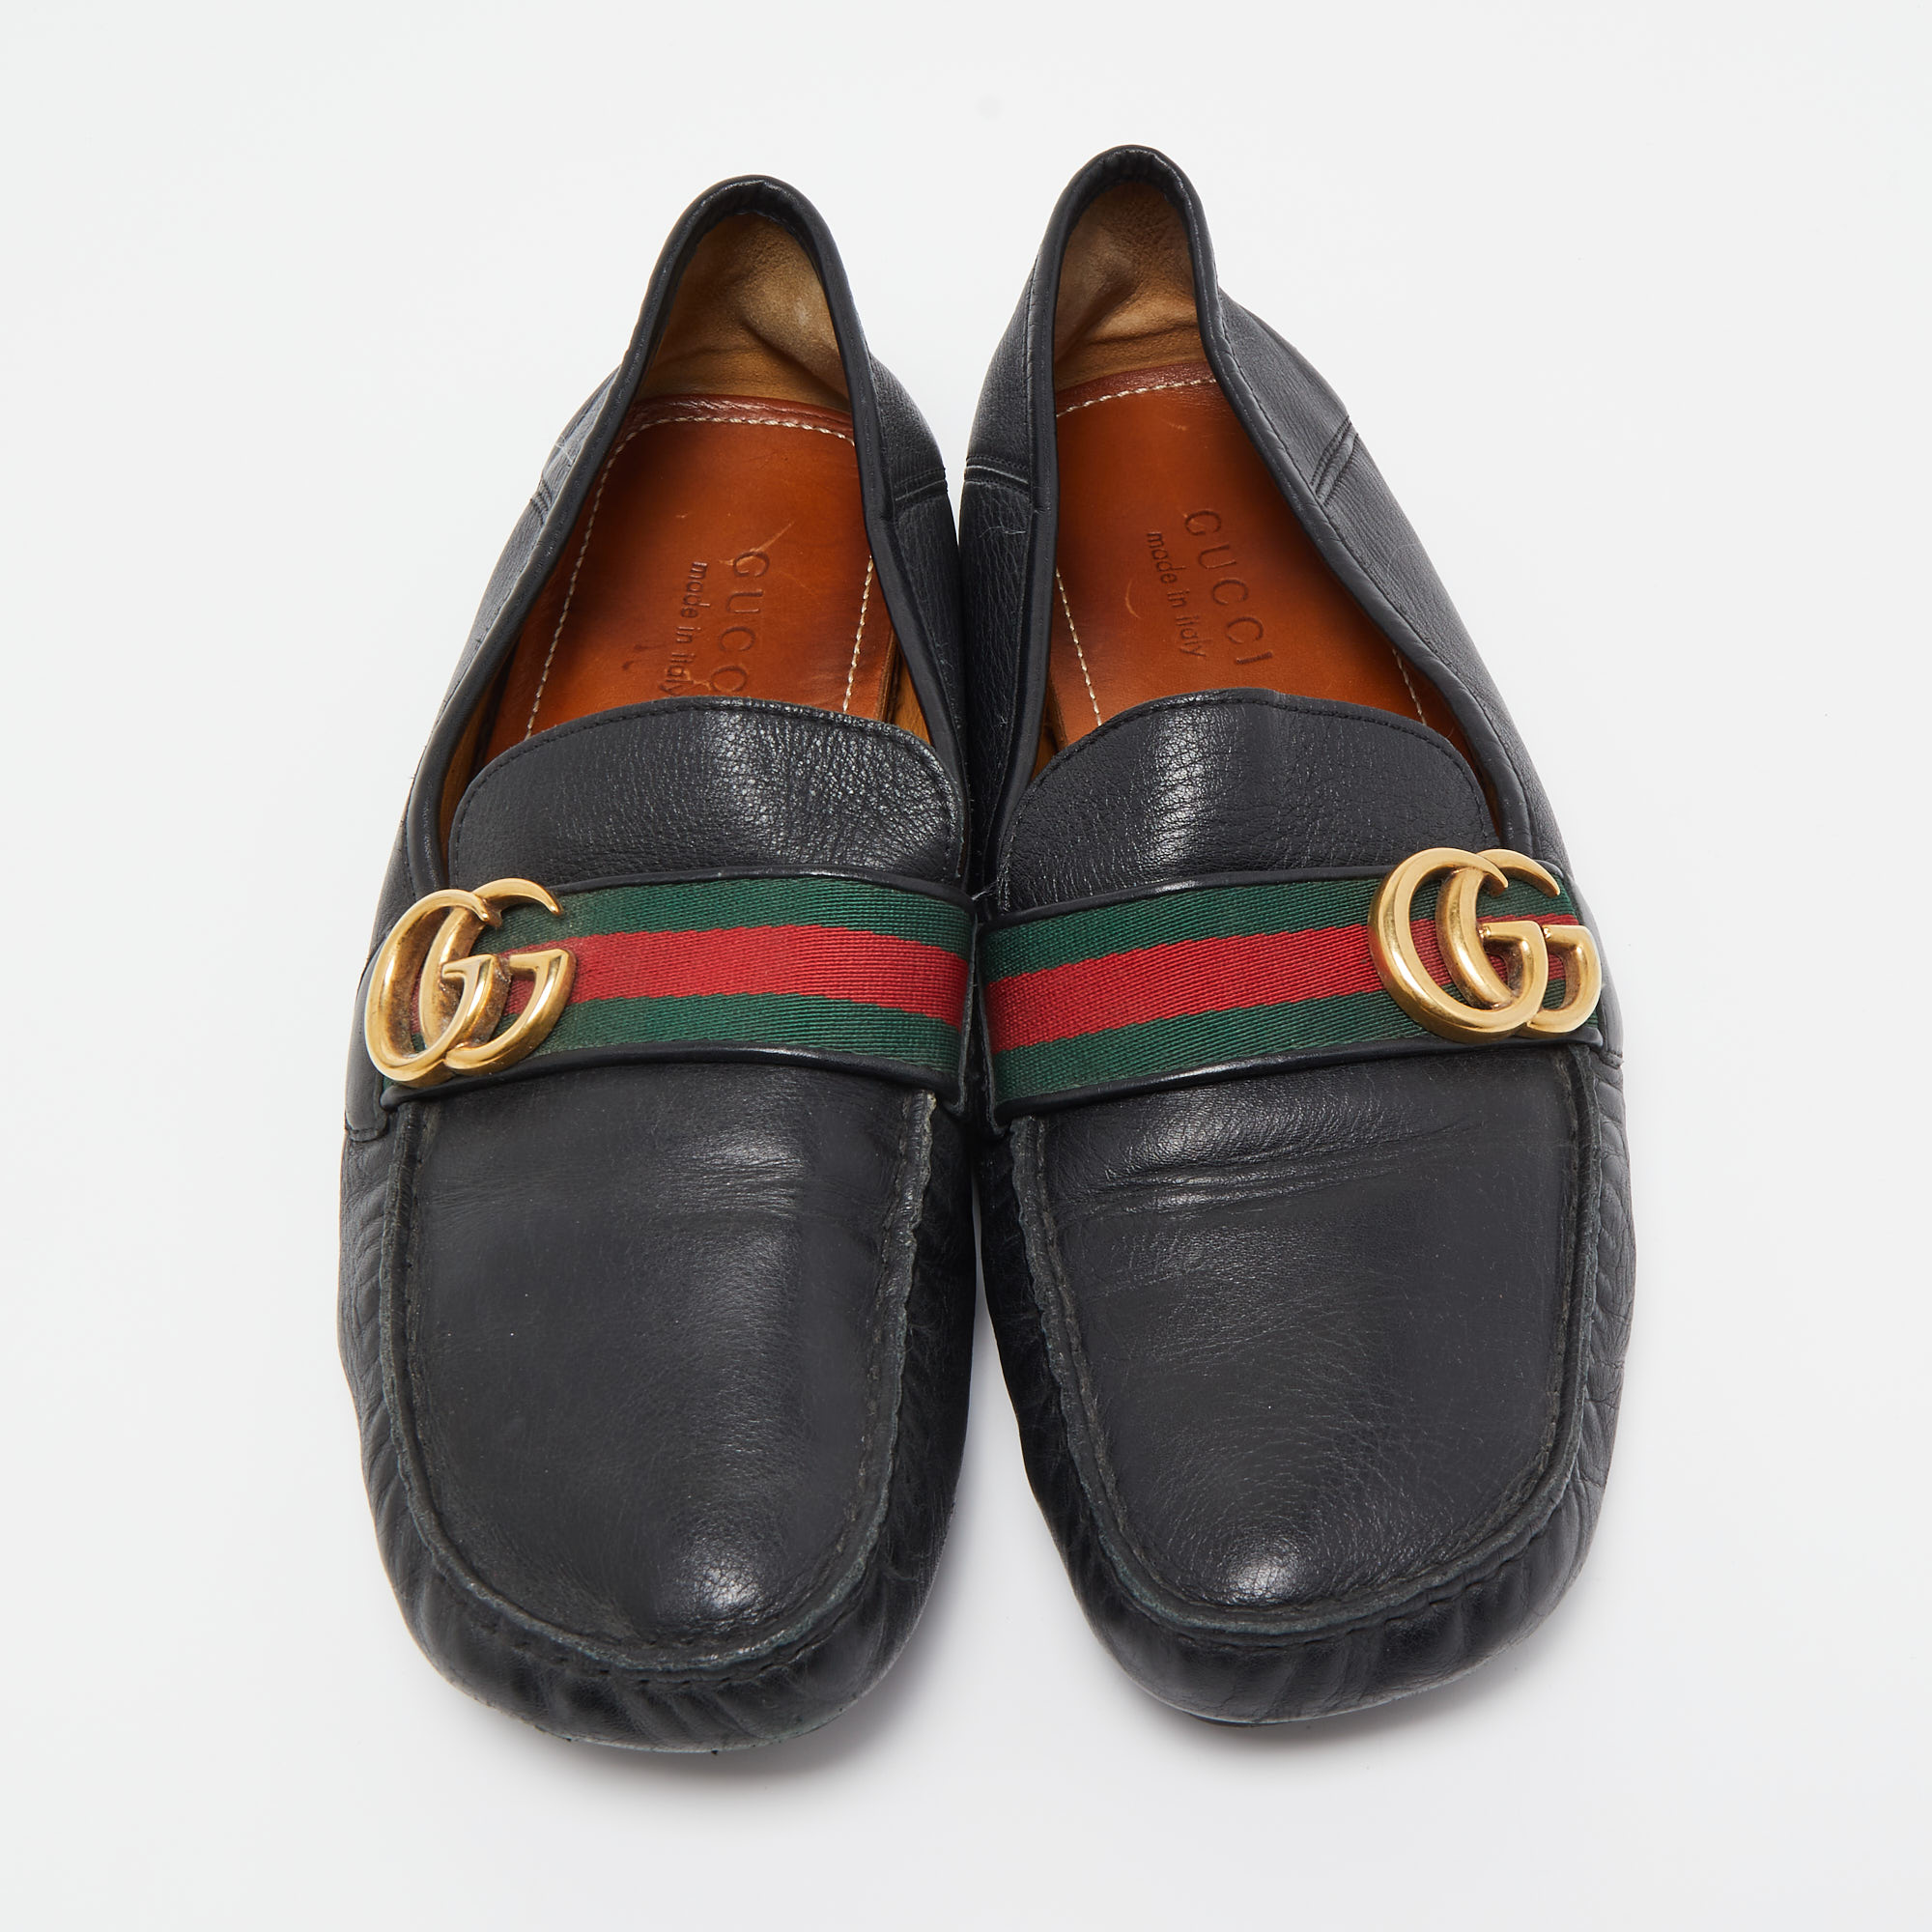 Gucci Black Leather GG Marmont Web Driver Slip On Loafers Size 42